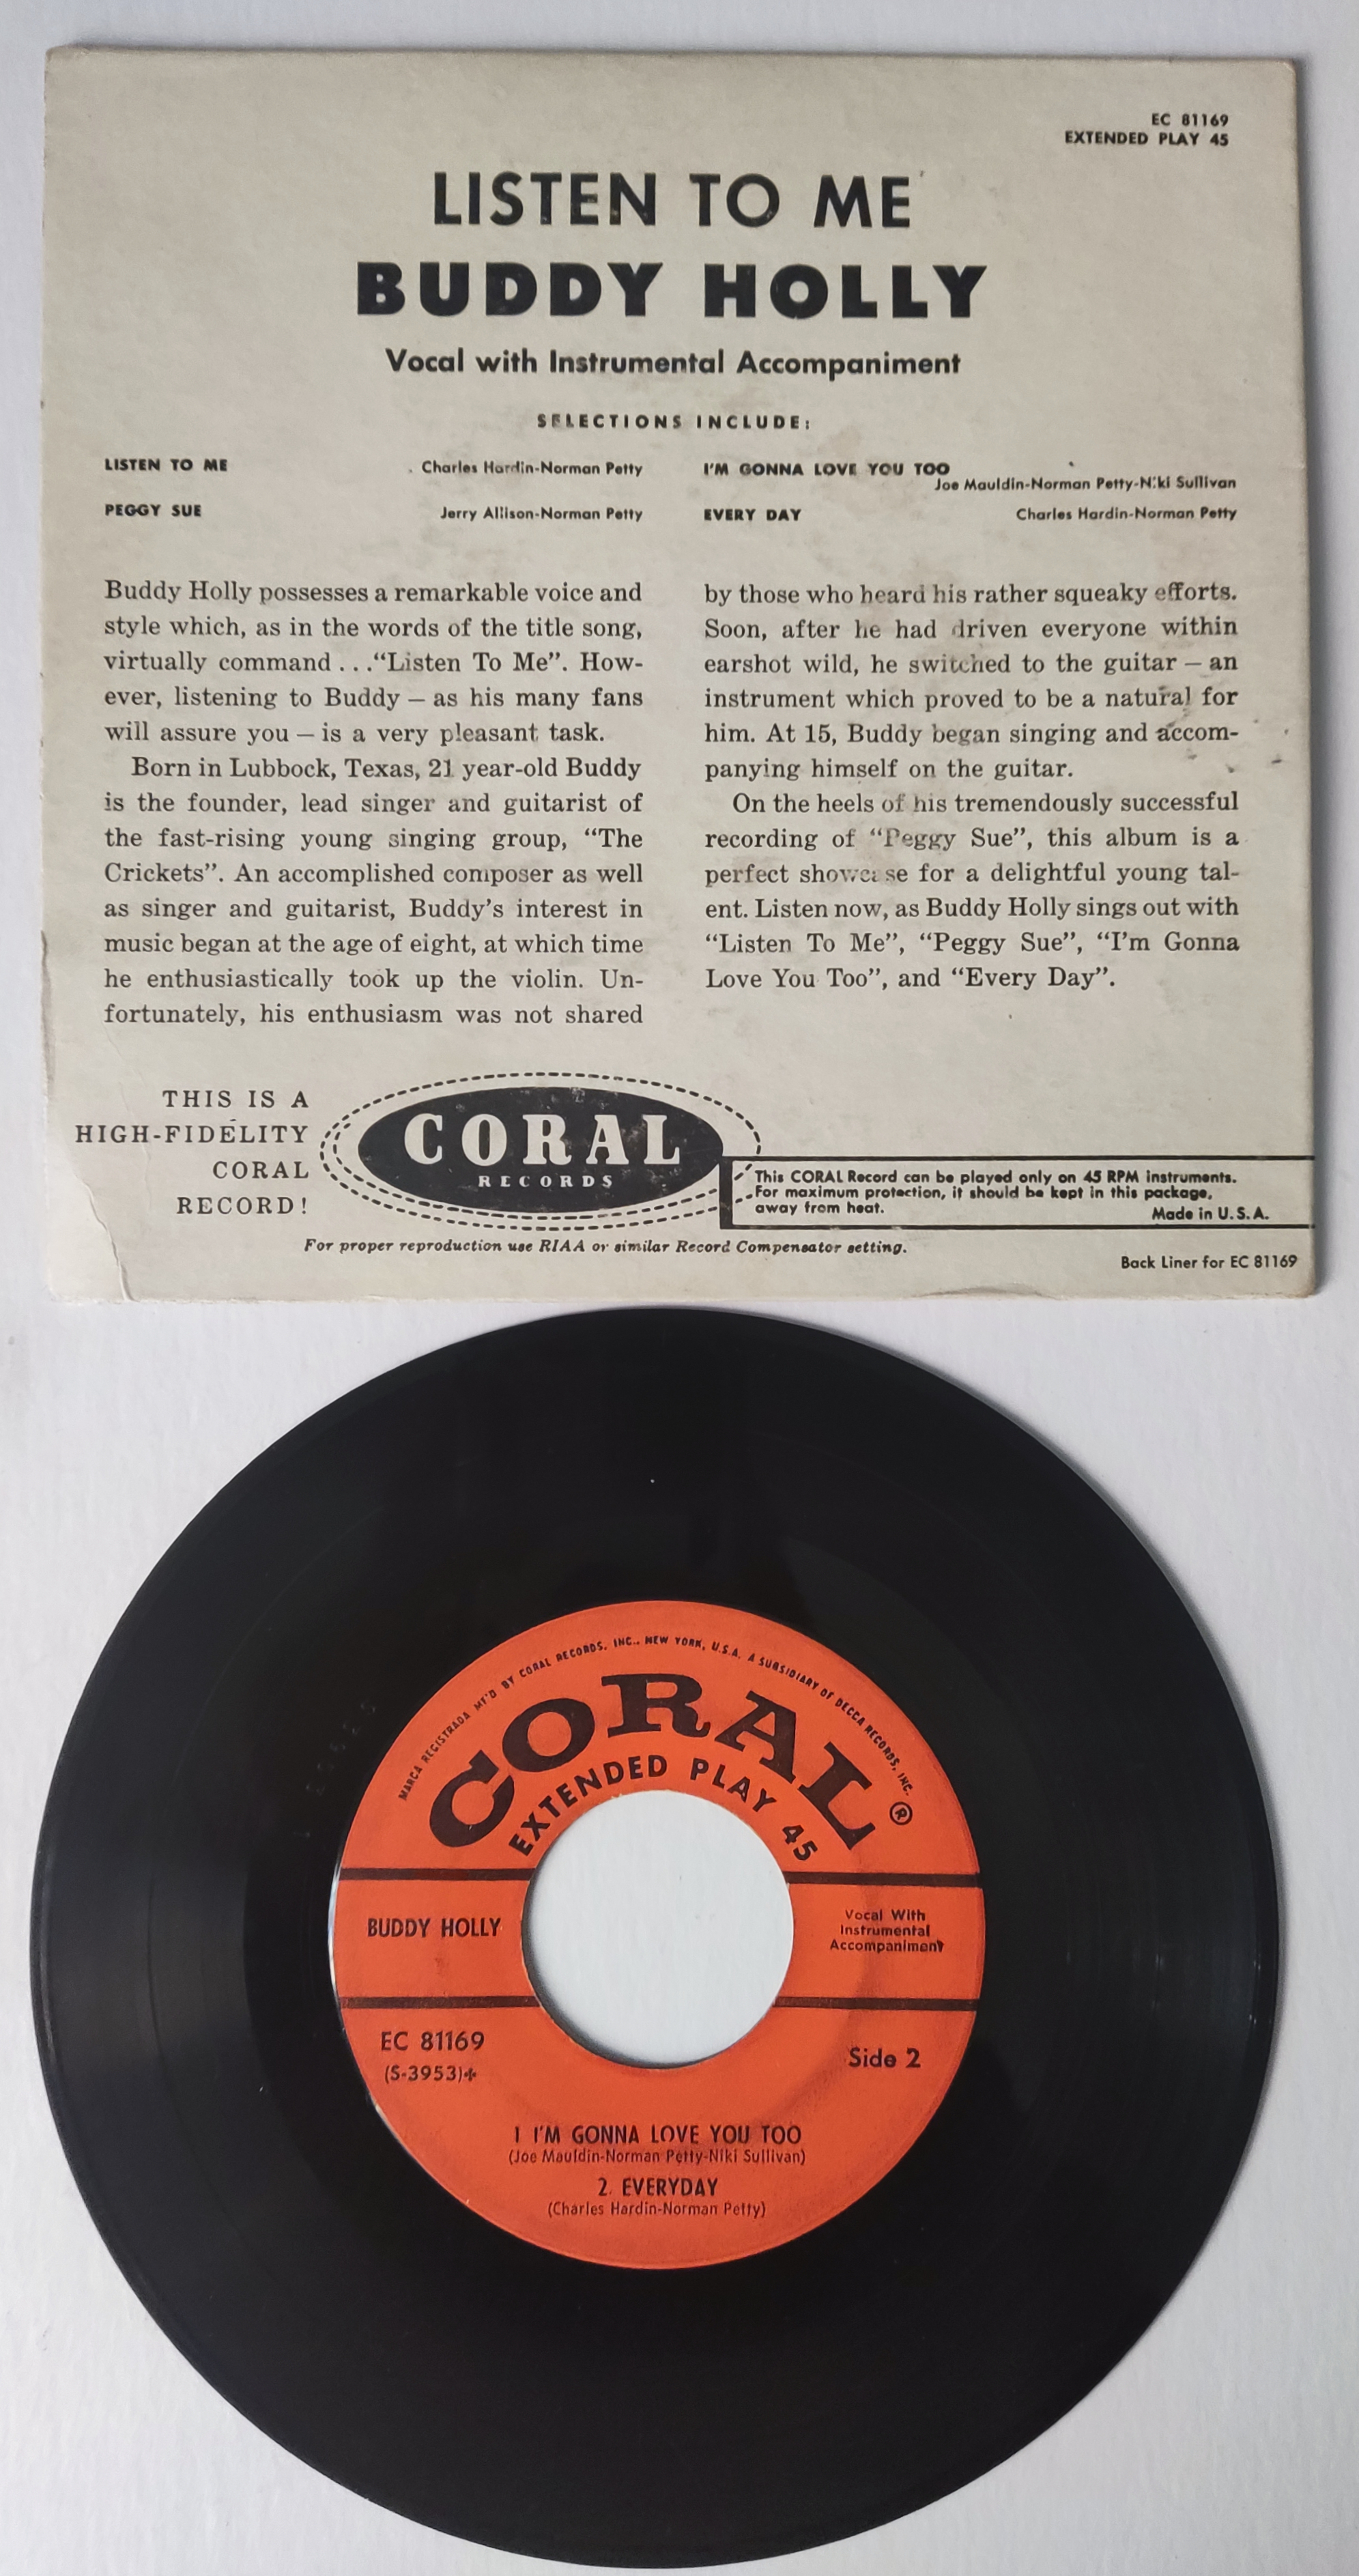 Buddy Holly - Listen to me 7" EP 1st pressing on the Coral orange label. - Image 2 of 2